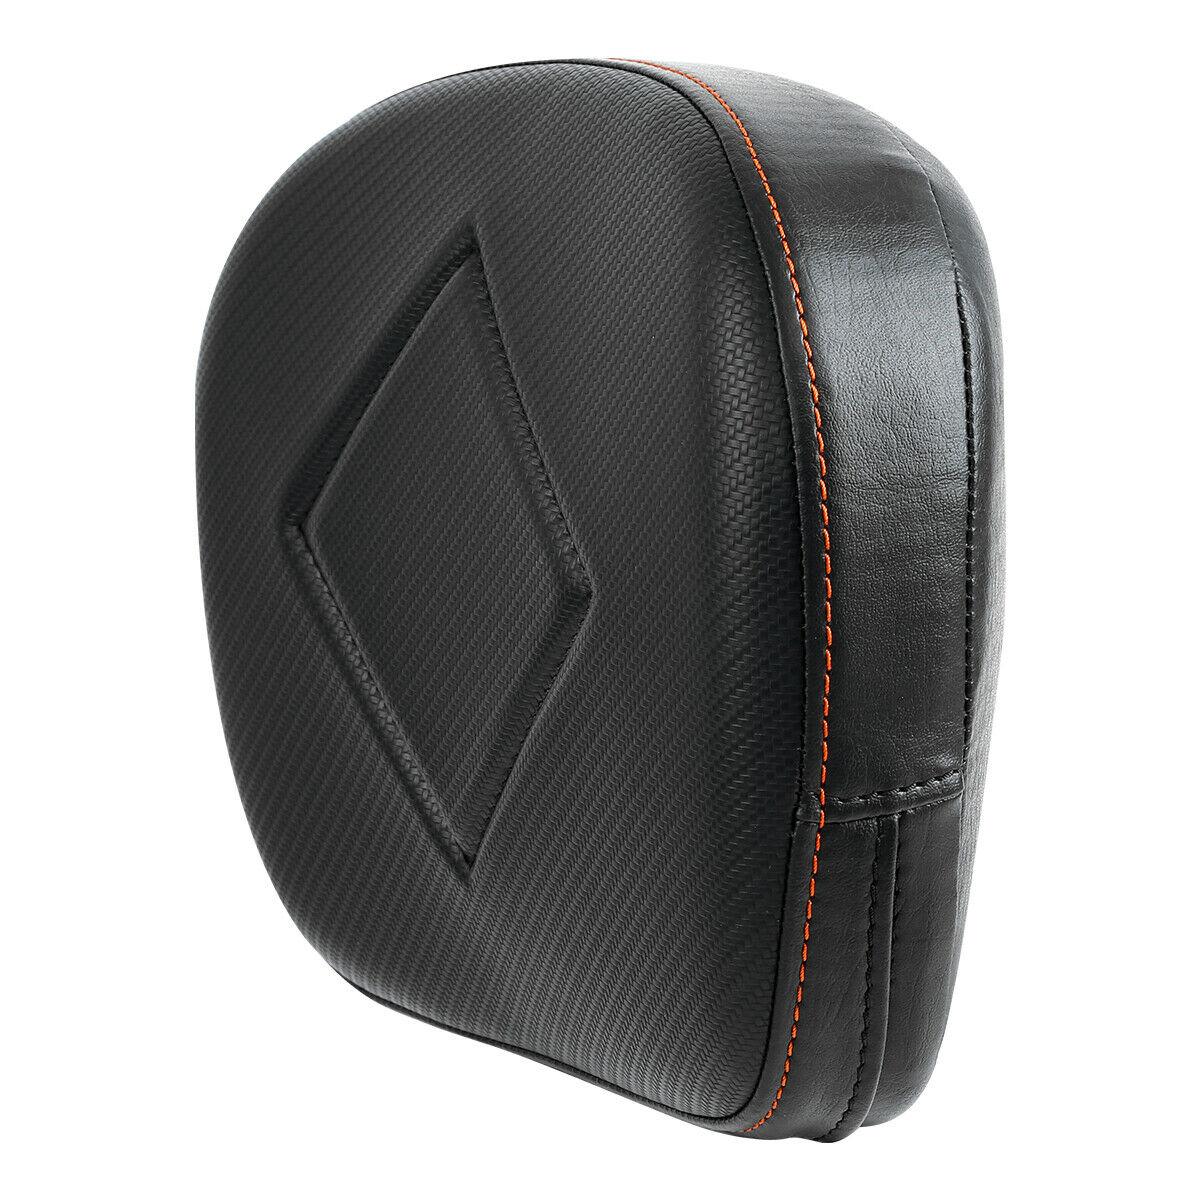 Passenger Sissy Bar Backrest Pad Fit For Harley Touring Electra Glide Softail - Moto Life Products